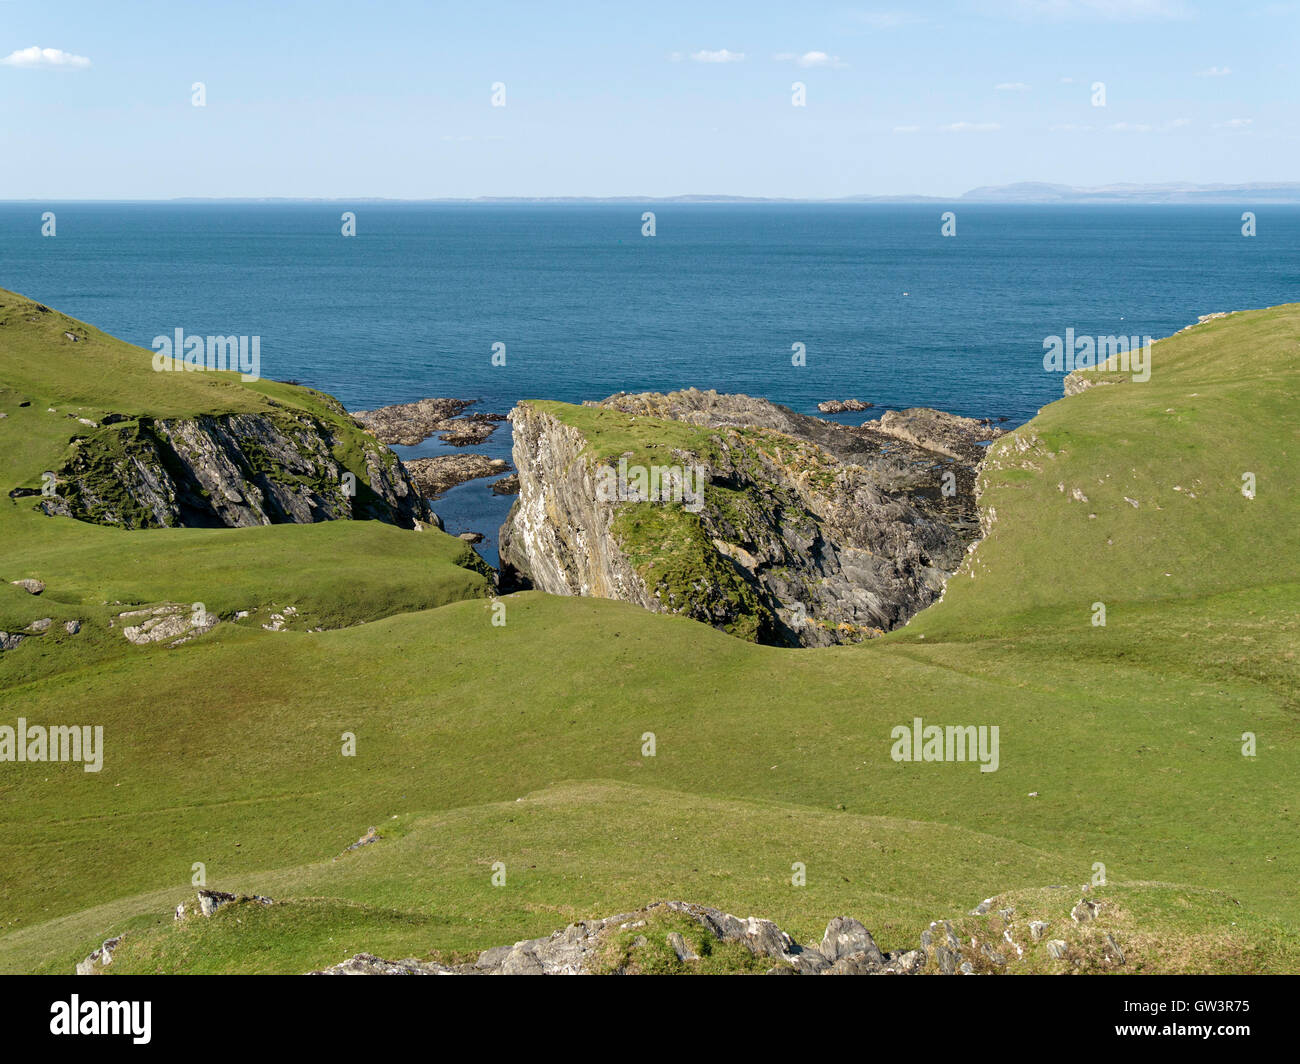 Green grass and cliffs and sea near Pig's Paradise Isle of Colonsay, Scotland, UK. Stock Photo